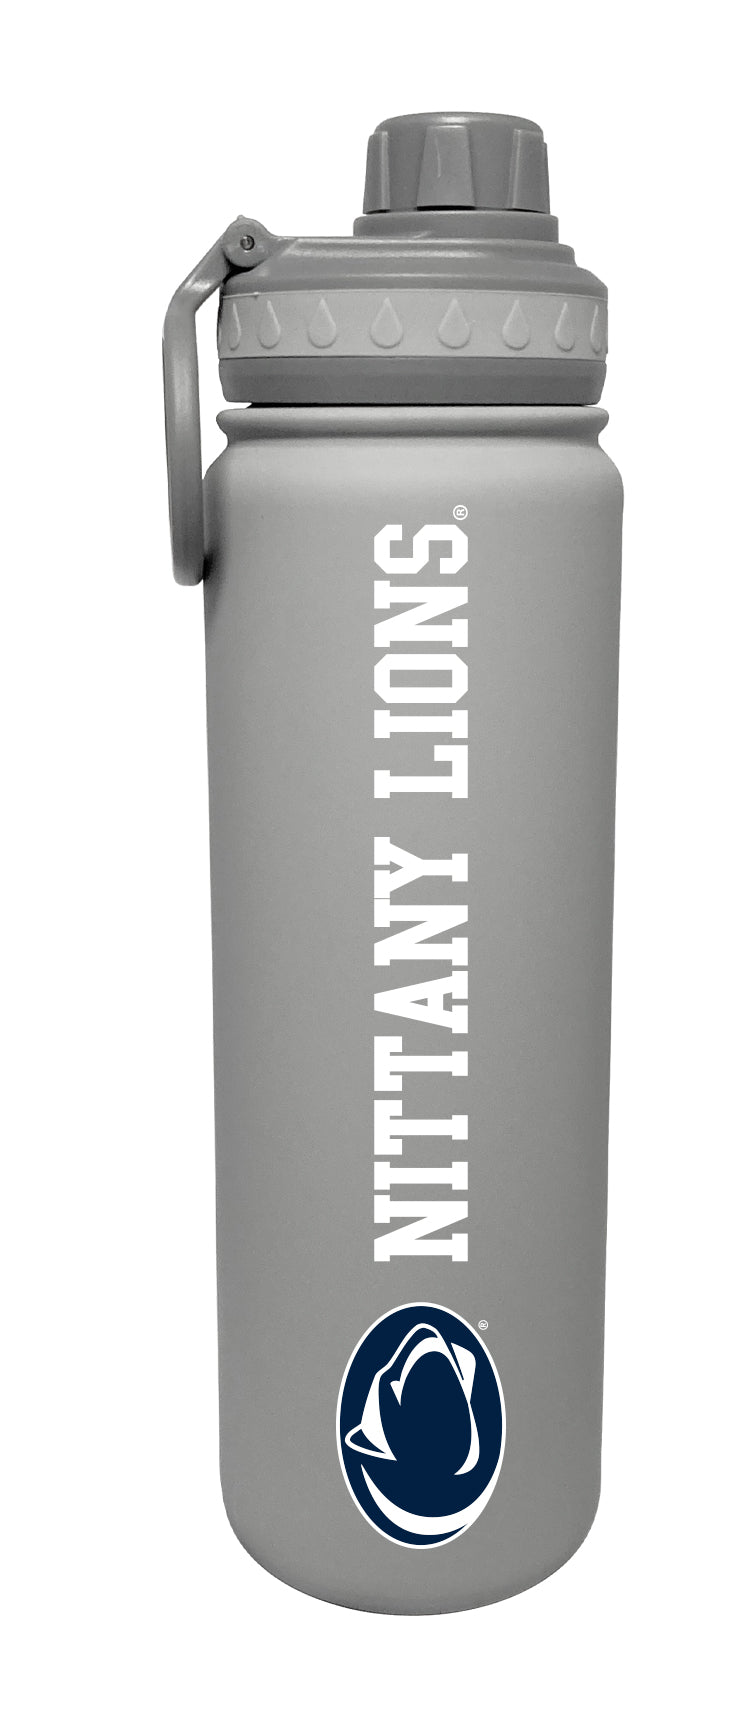 Penn State 24oz. Stainless Steel Bottle - Primary Logo & Wordmark – The  Fanatic Group